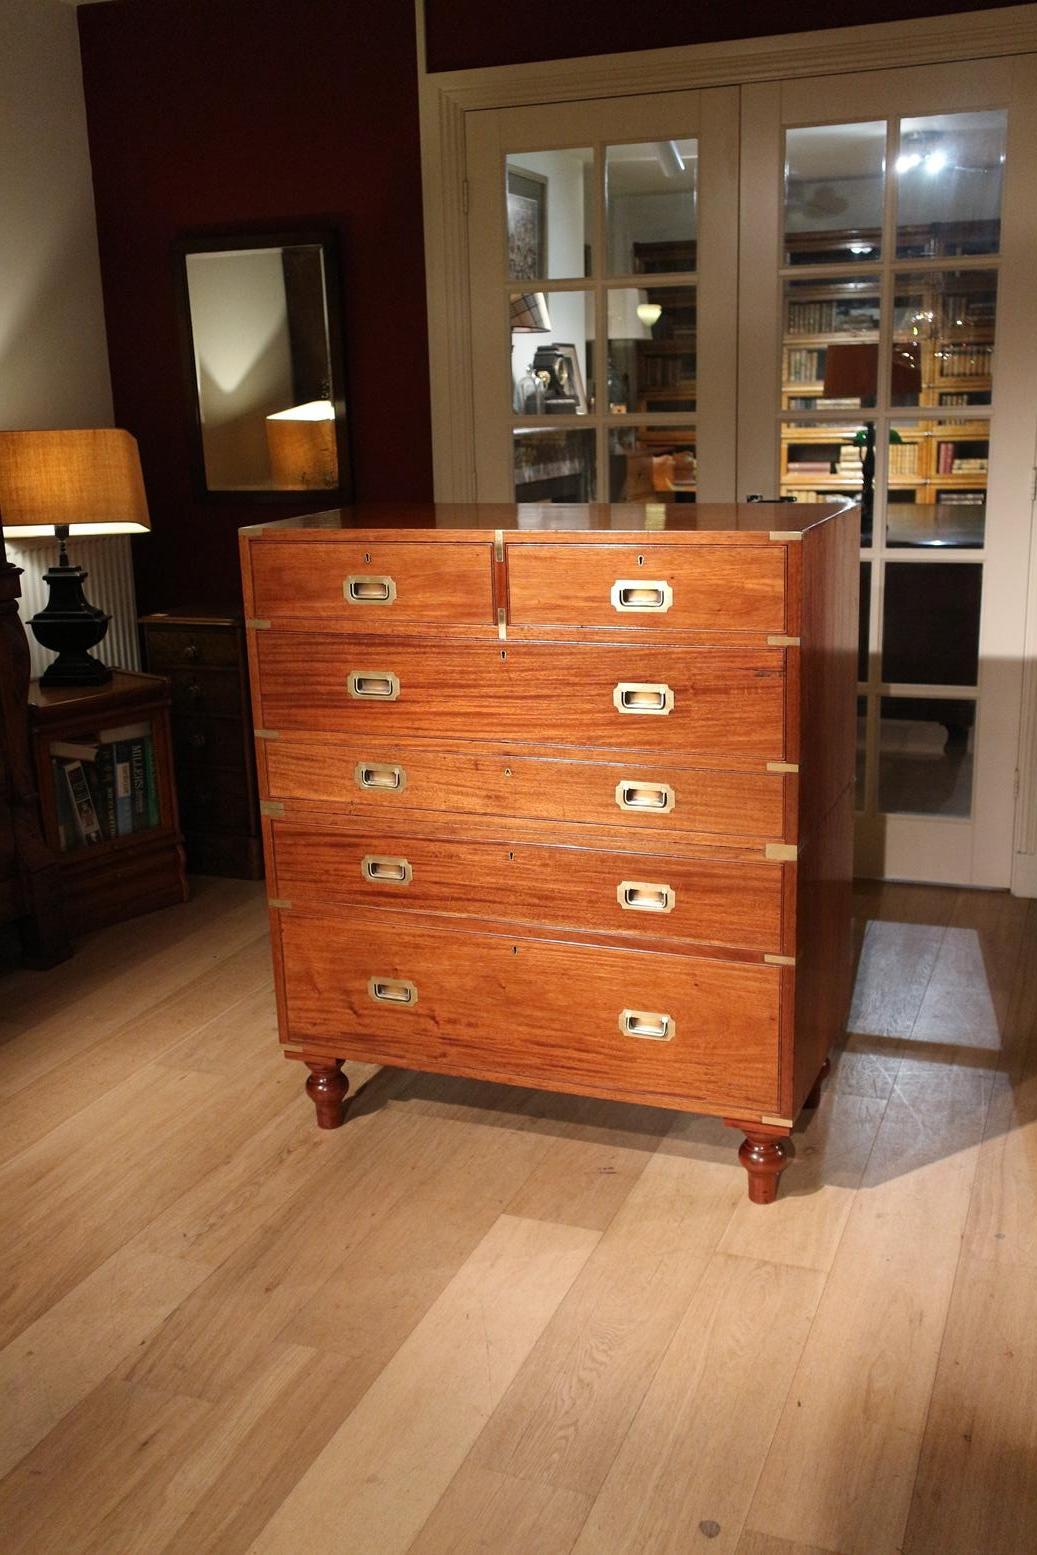 Antique mahogany Campaign chest of drawers with desk drawer. Entirely in perfect condition. The desk drawer has storage compartments and a small secret drawer. Which is almost impossible to find

As is usual with a campaign chest of drawers, the